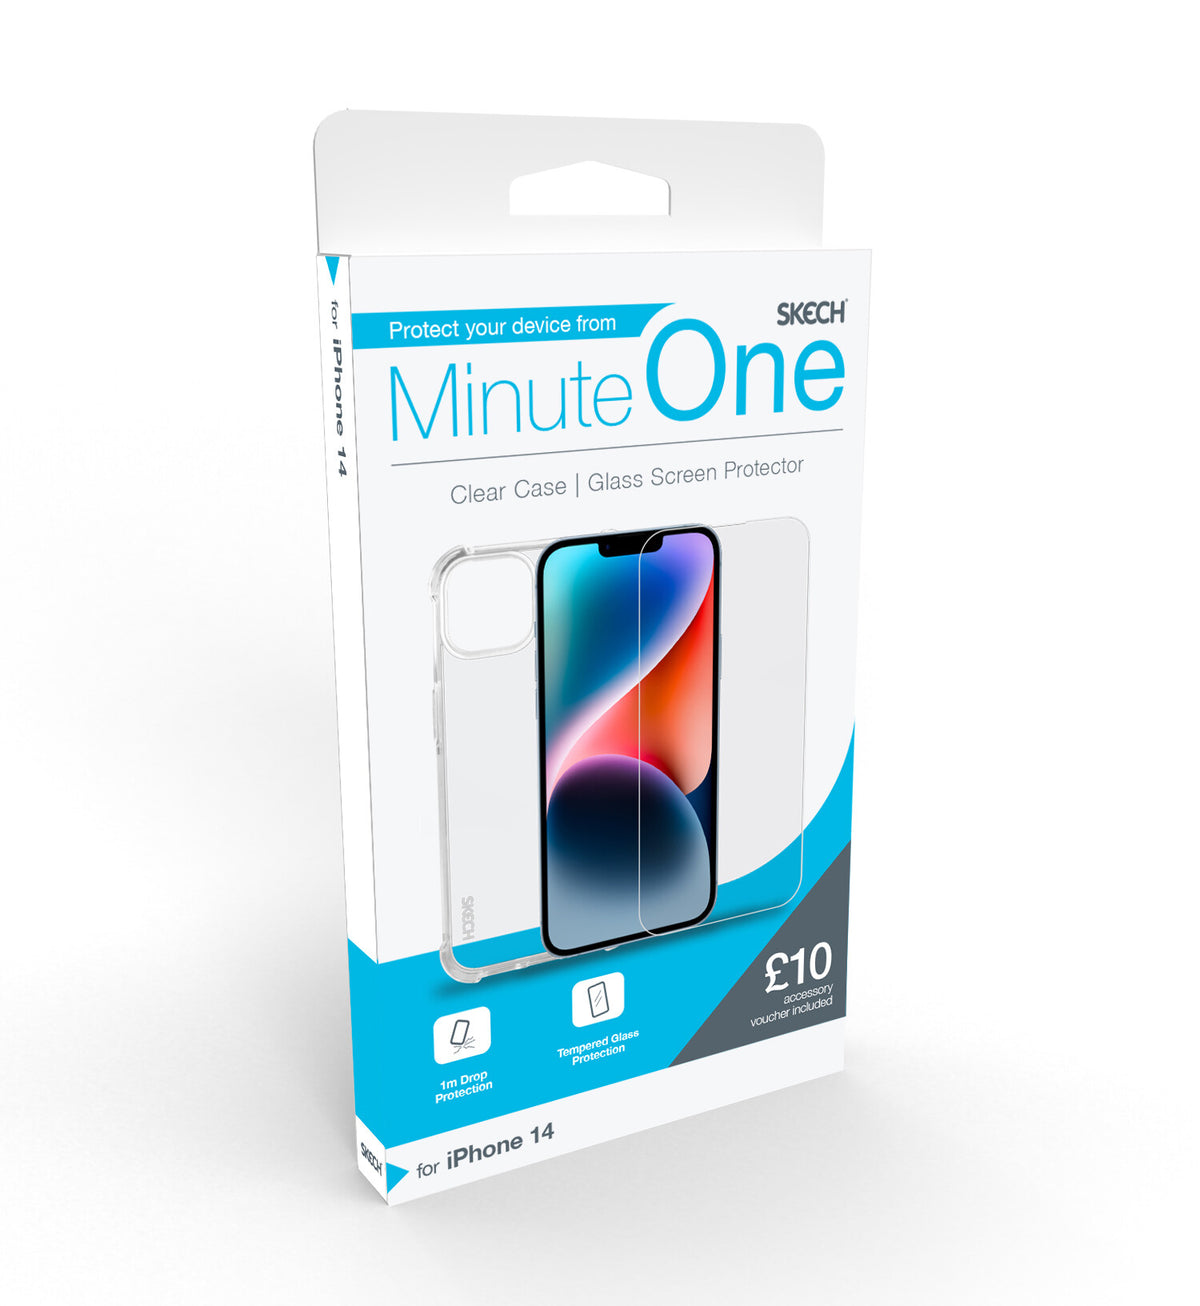 Skech Minute One Bundle for iPhone 14